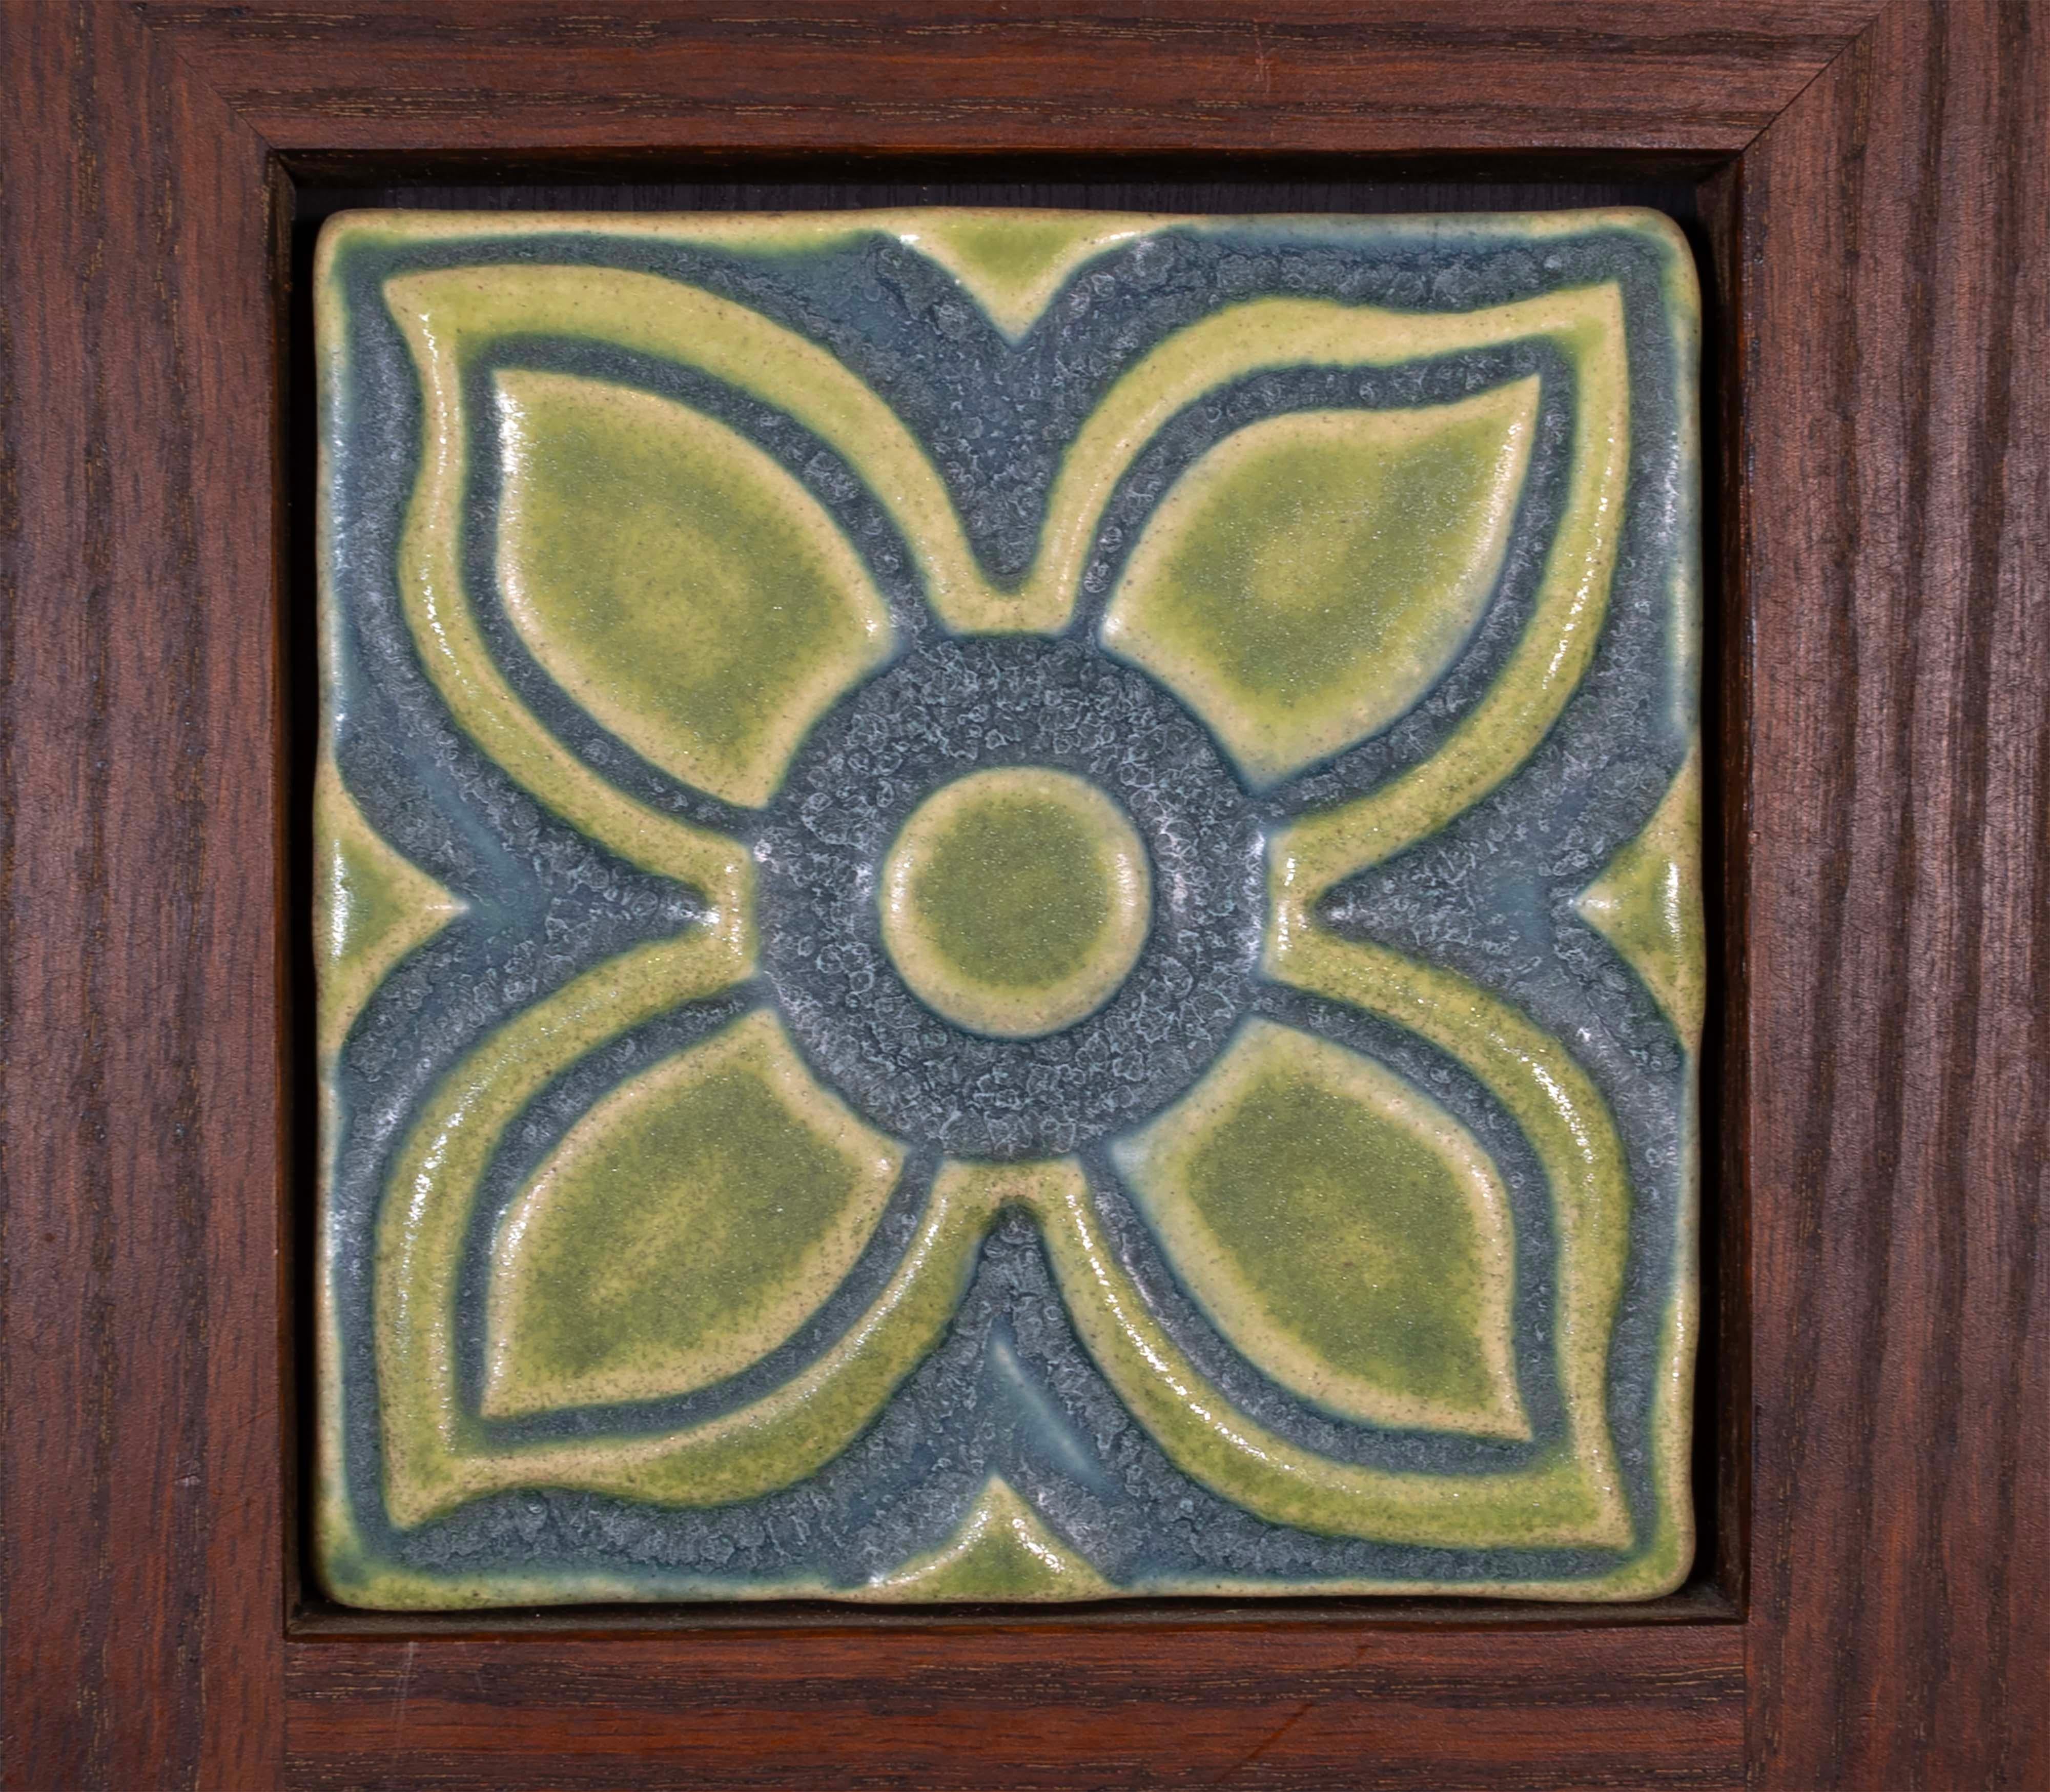 This beautiful framed pewabic triple flower tile set is a must-have for any home! Featuring soft earthy greens and delicate blues, this piece is sure to stand out in any space. In very good condition. Dimensions: 25.5